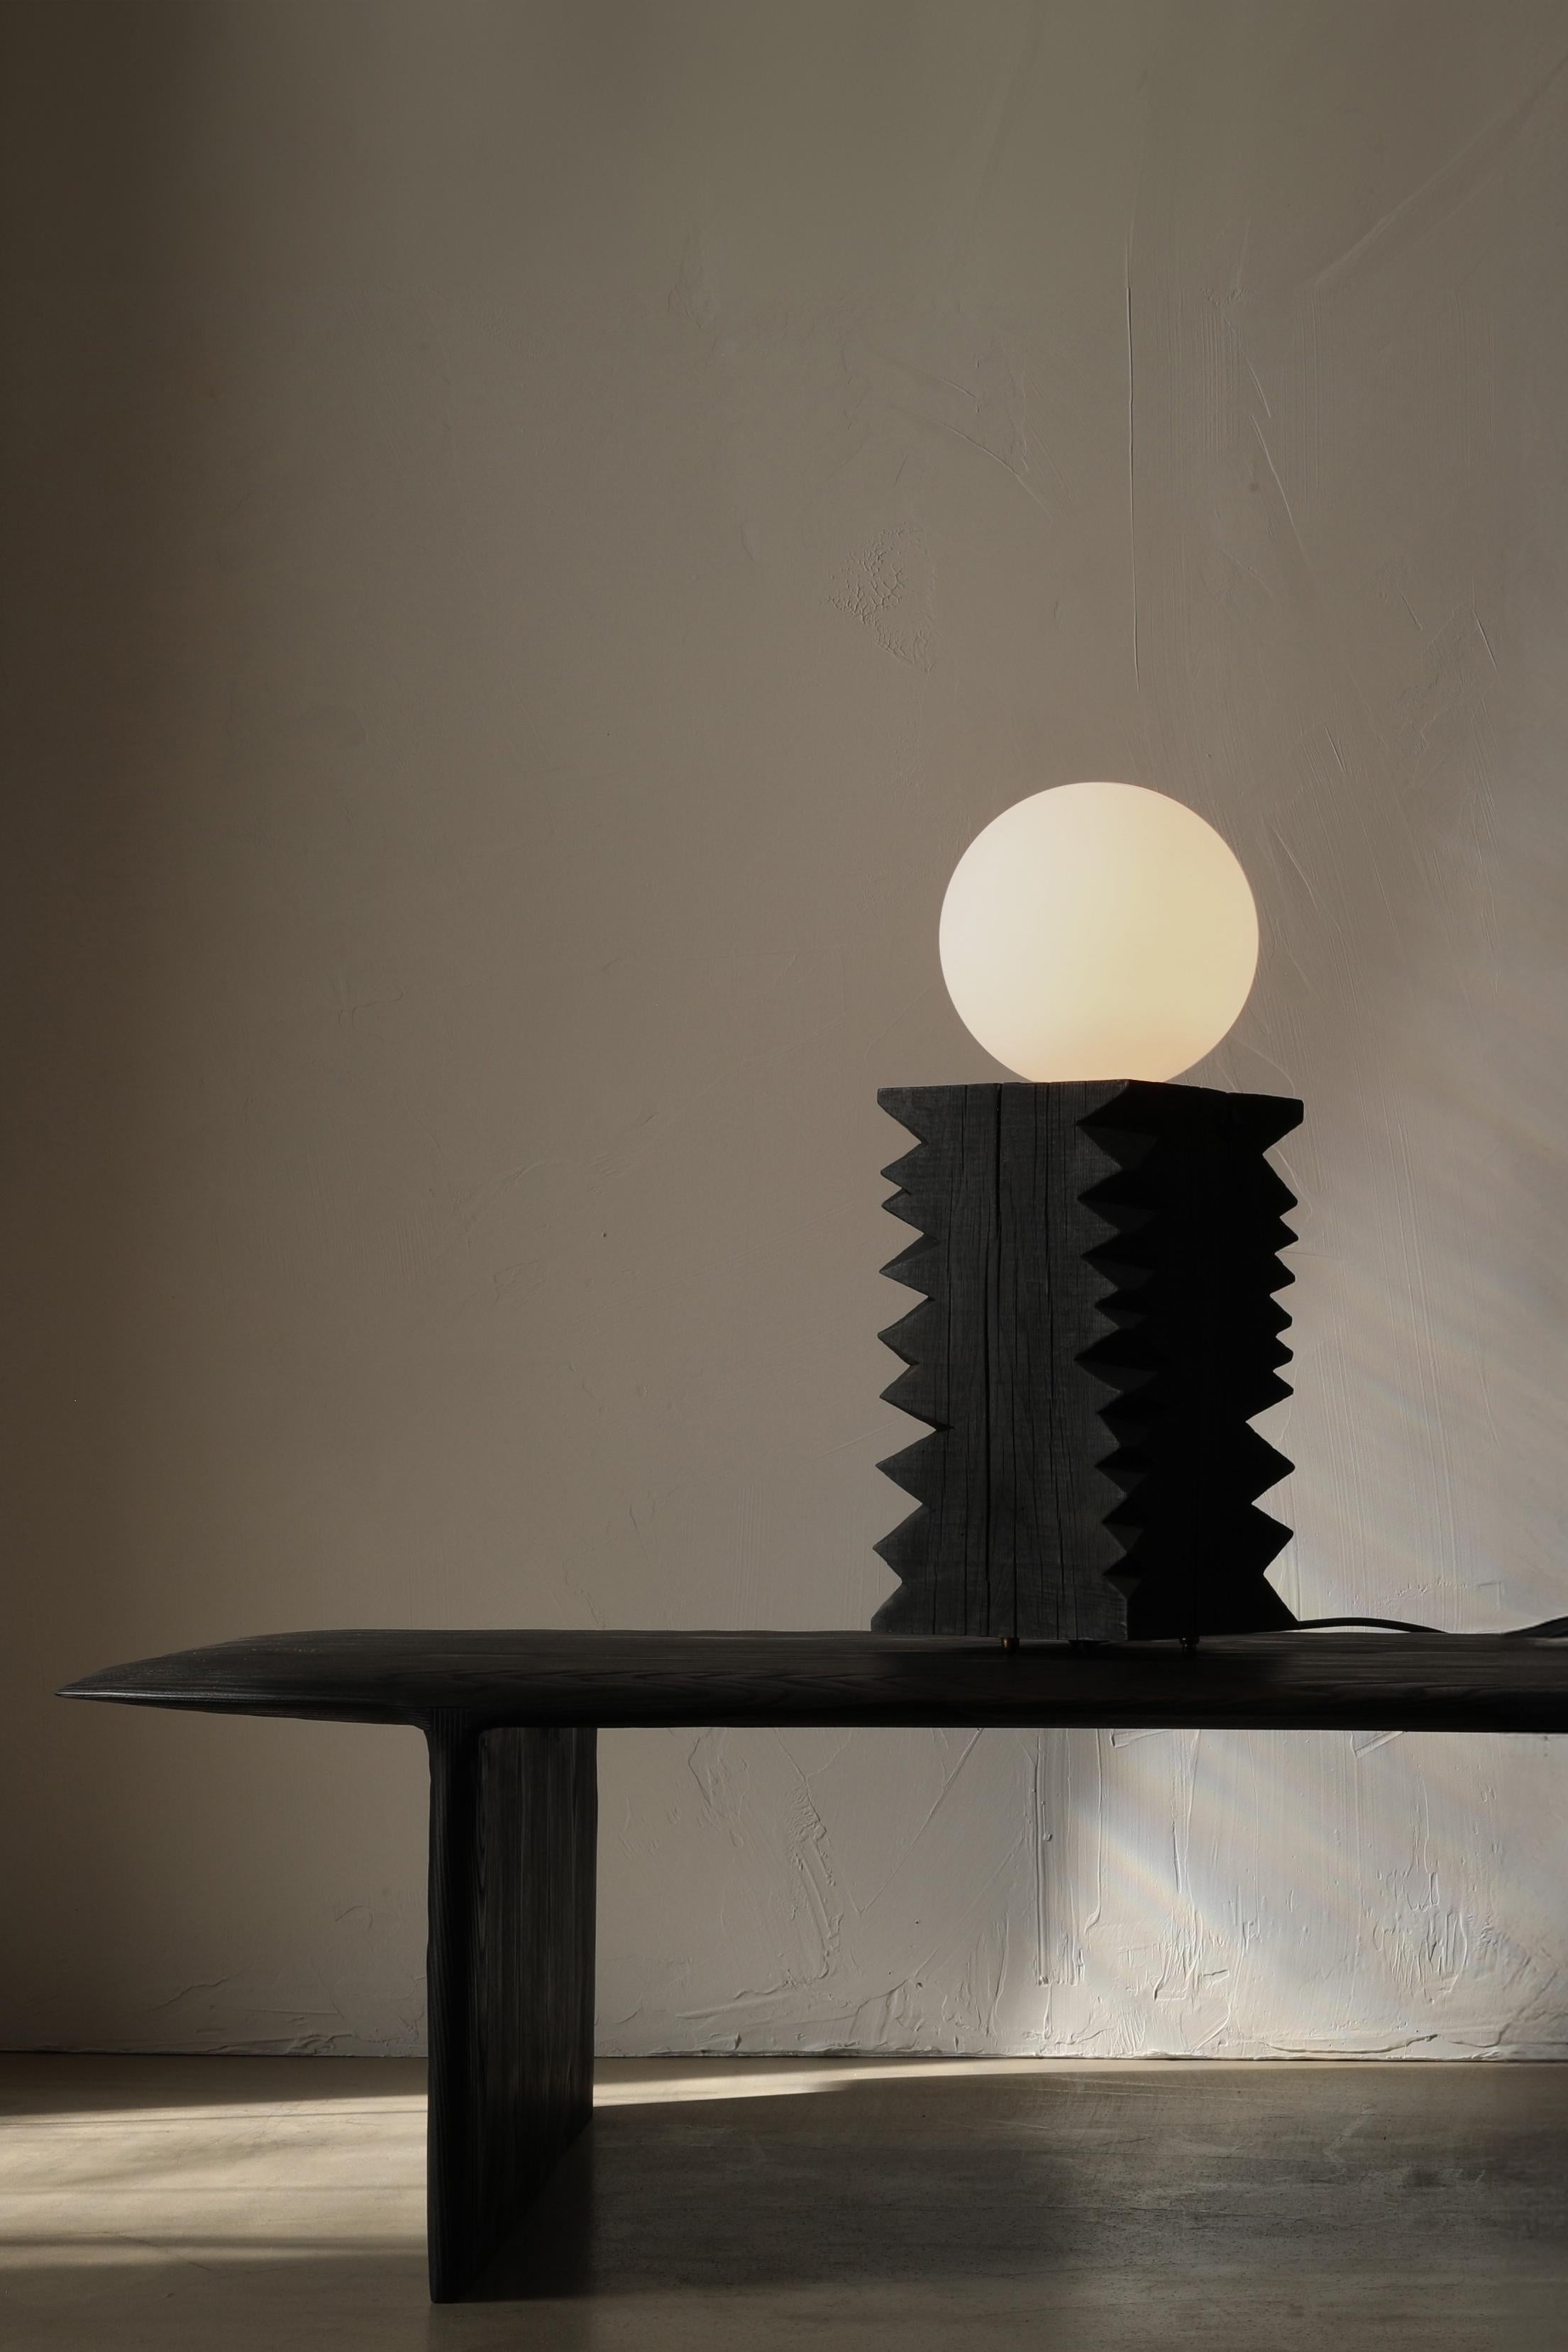 The Notch Lamp is a solid oak table lamp with a large frosted globe bulb. The lamp sits on four bronze feet and is switched on the cord with a dimmer.

This collection finds its foundation in ‘cribbage’, a rough-cut lumber used to build support